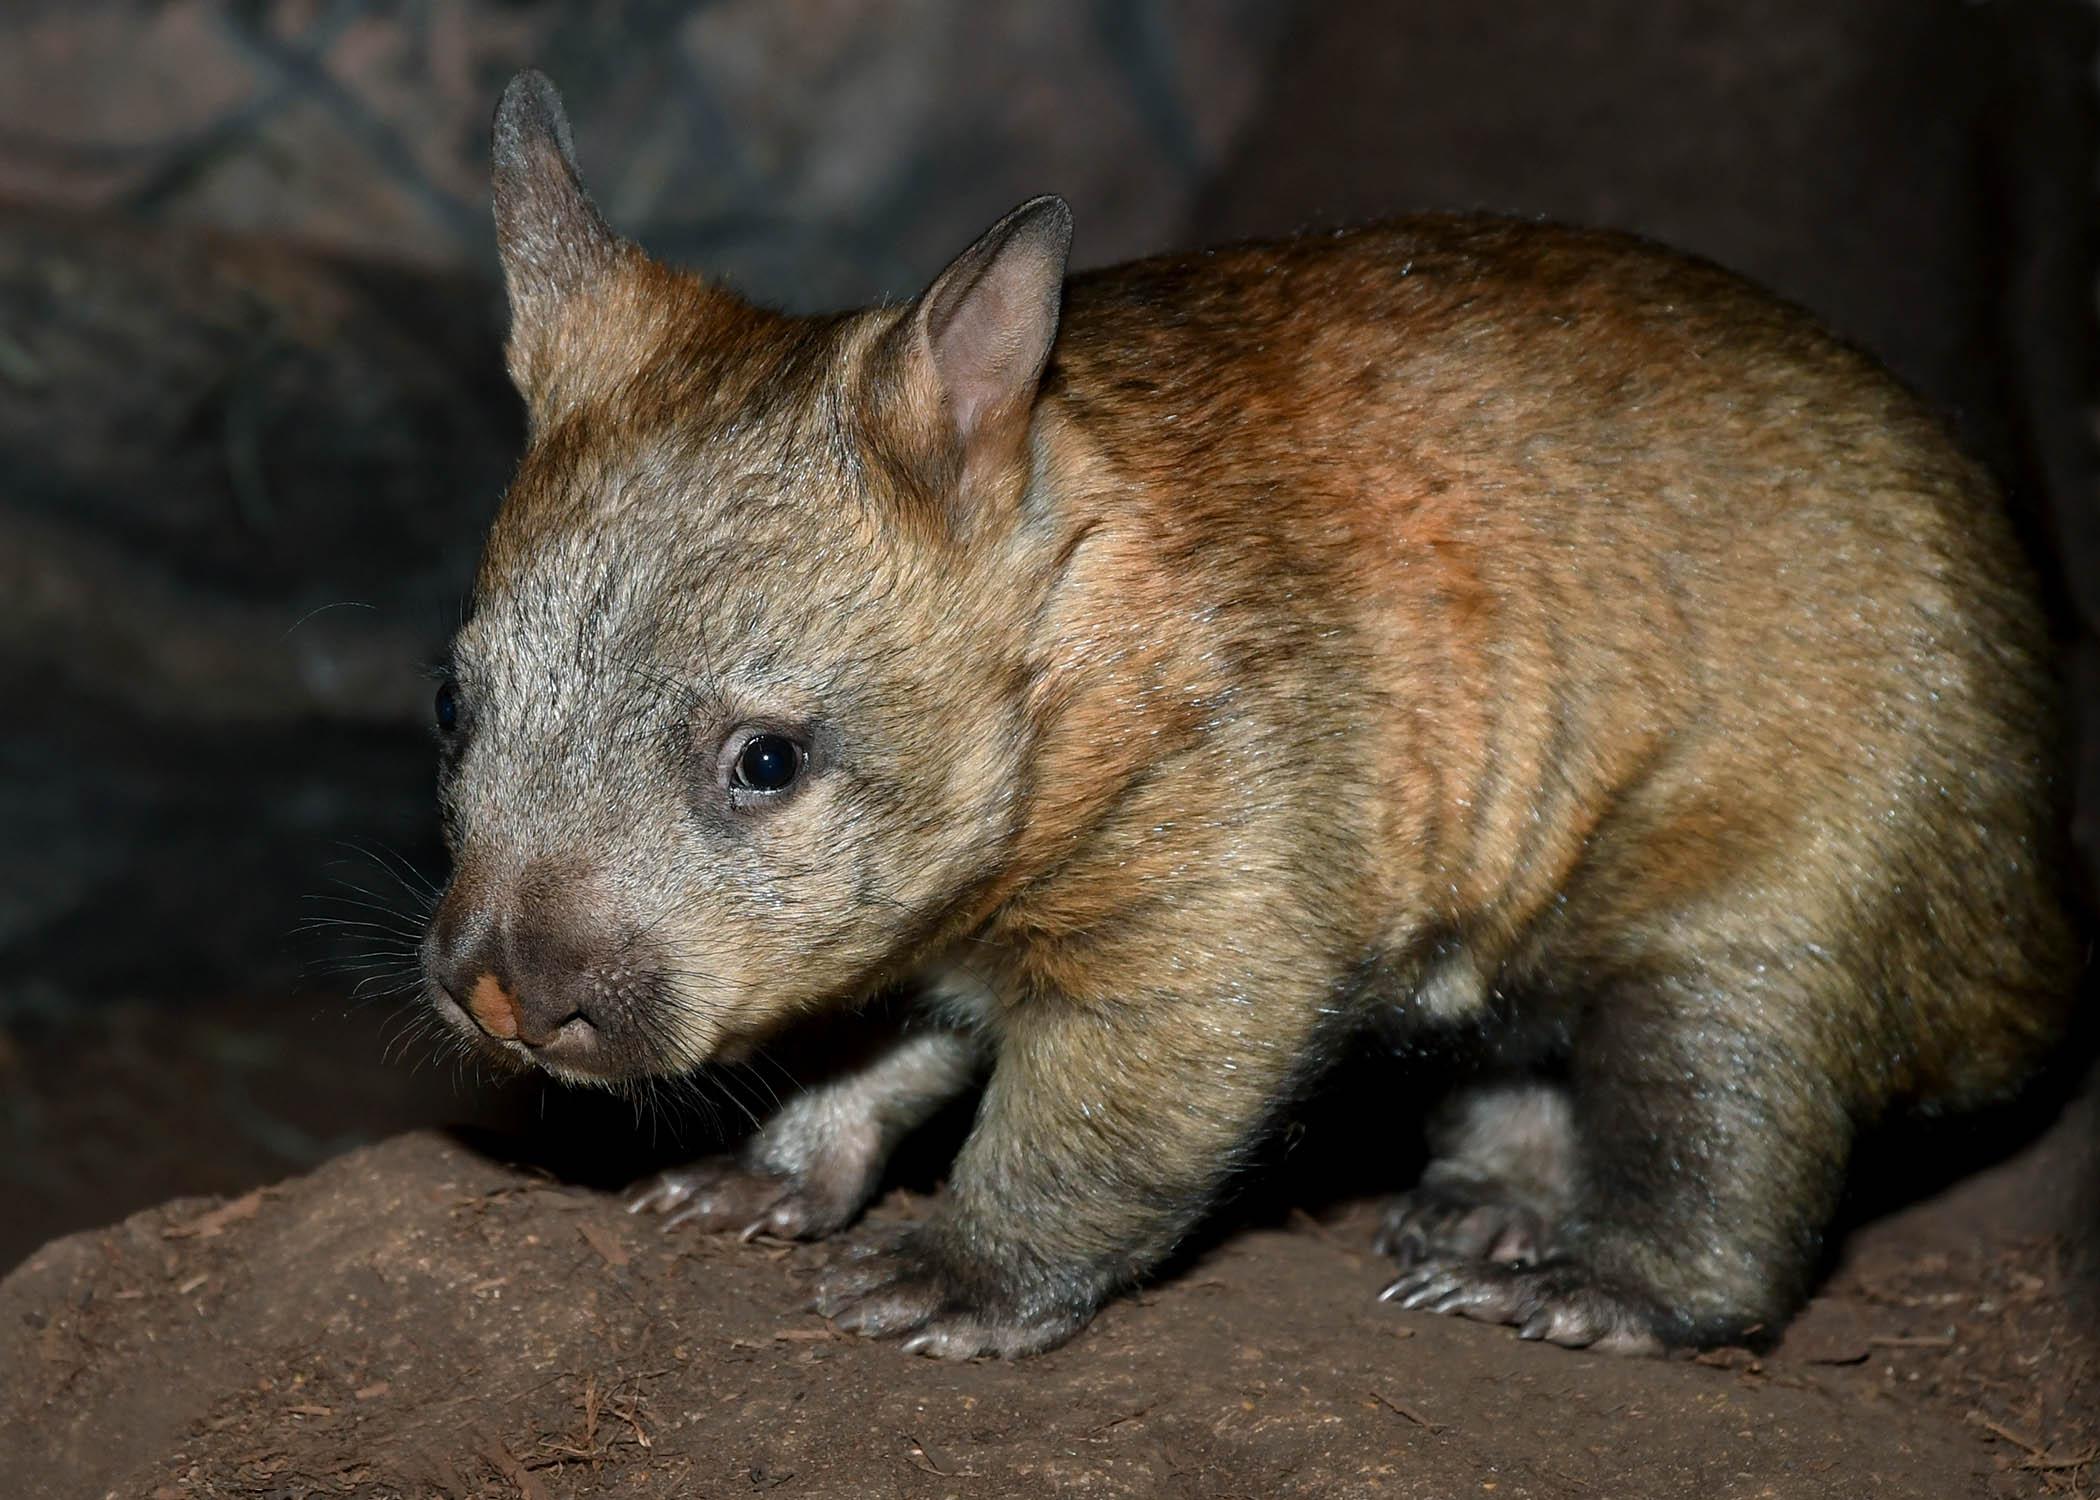 Brookfield Zoo’s new wombat joey recently emerged from her mom’s pouch. (Jim Schulz / Chicago Zoological Society)